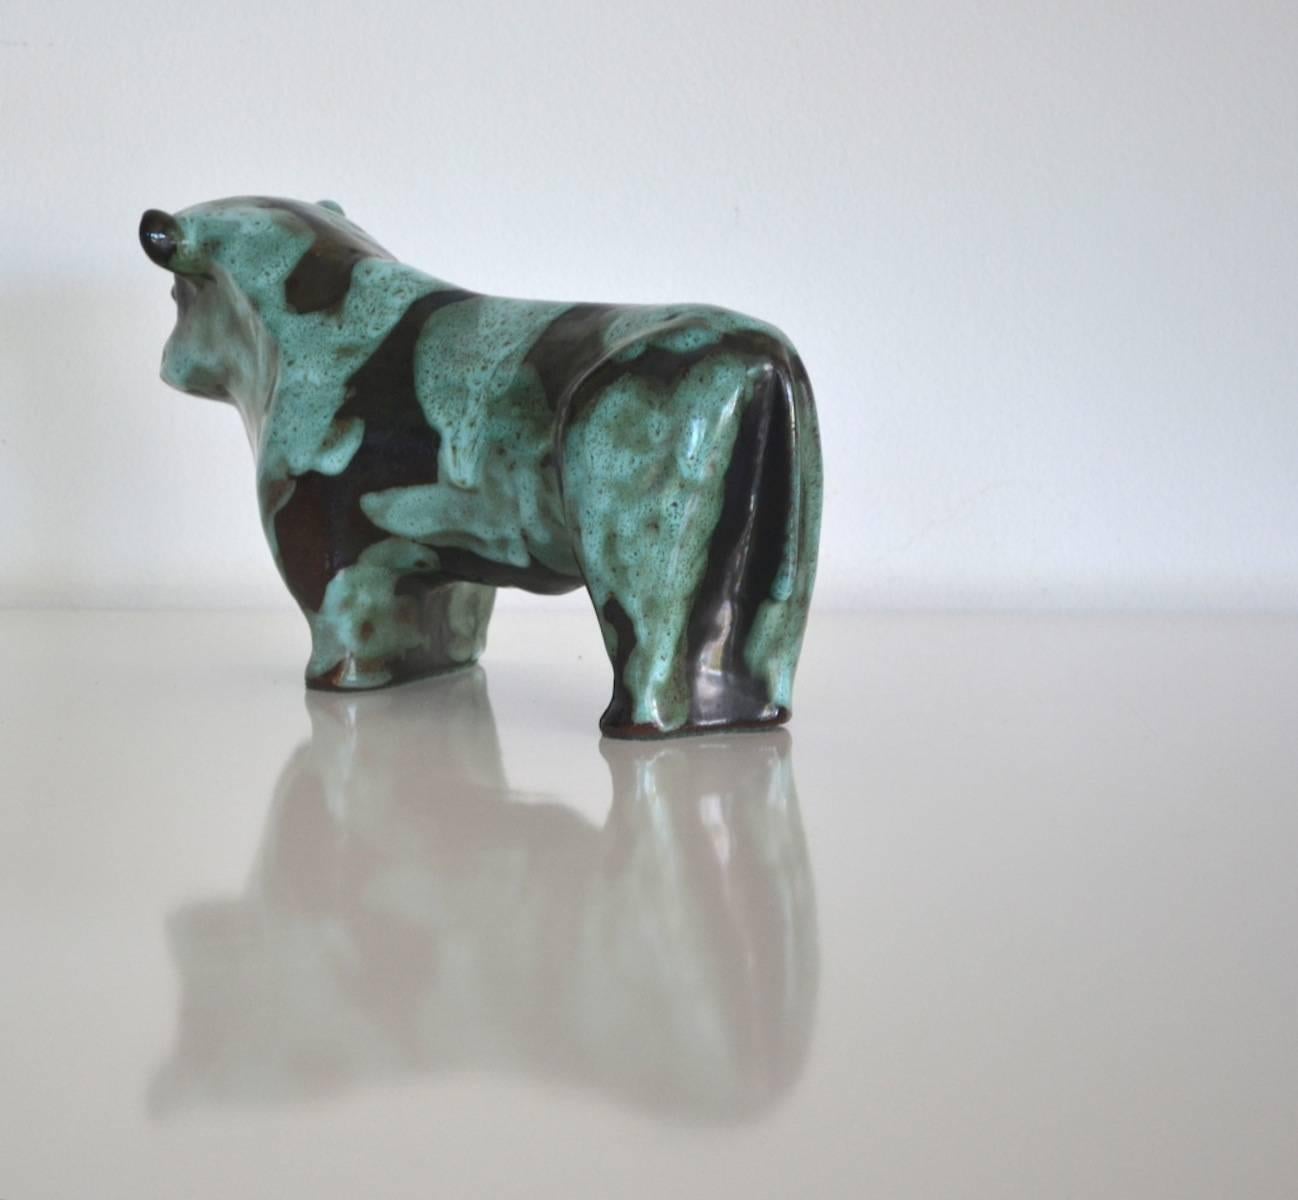 Striking Mid-Century hand thrown ceramic bull sculpture by Marianna von Allesch, circa 1950s-1960s. This incredible aqua and ebony matte glazed sculpture is organic in form and signed on the bottom. The bull is in original pristine condition.